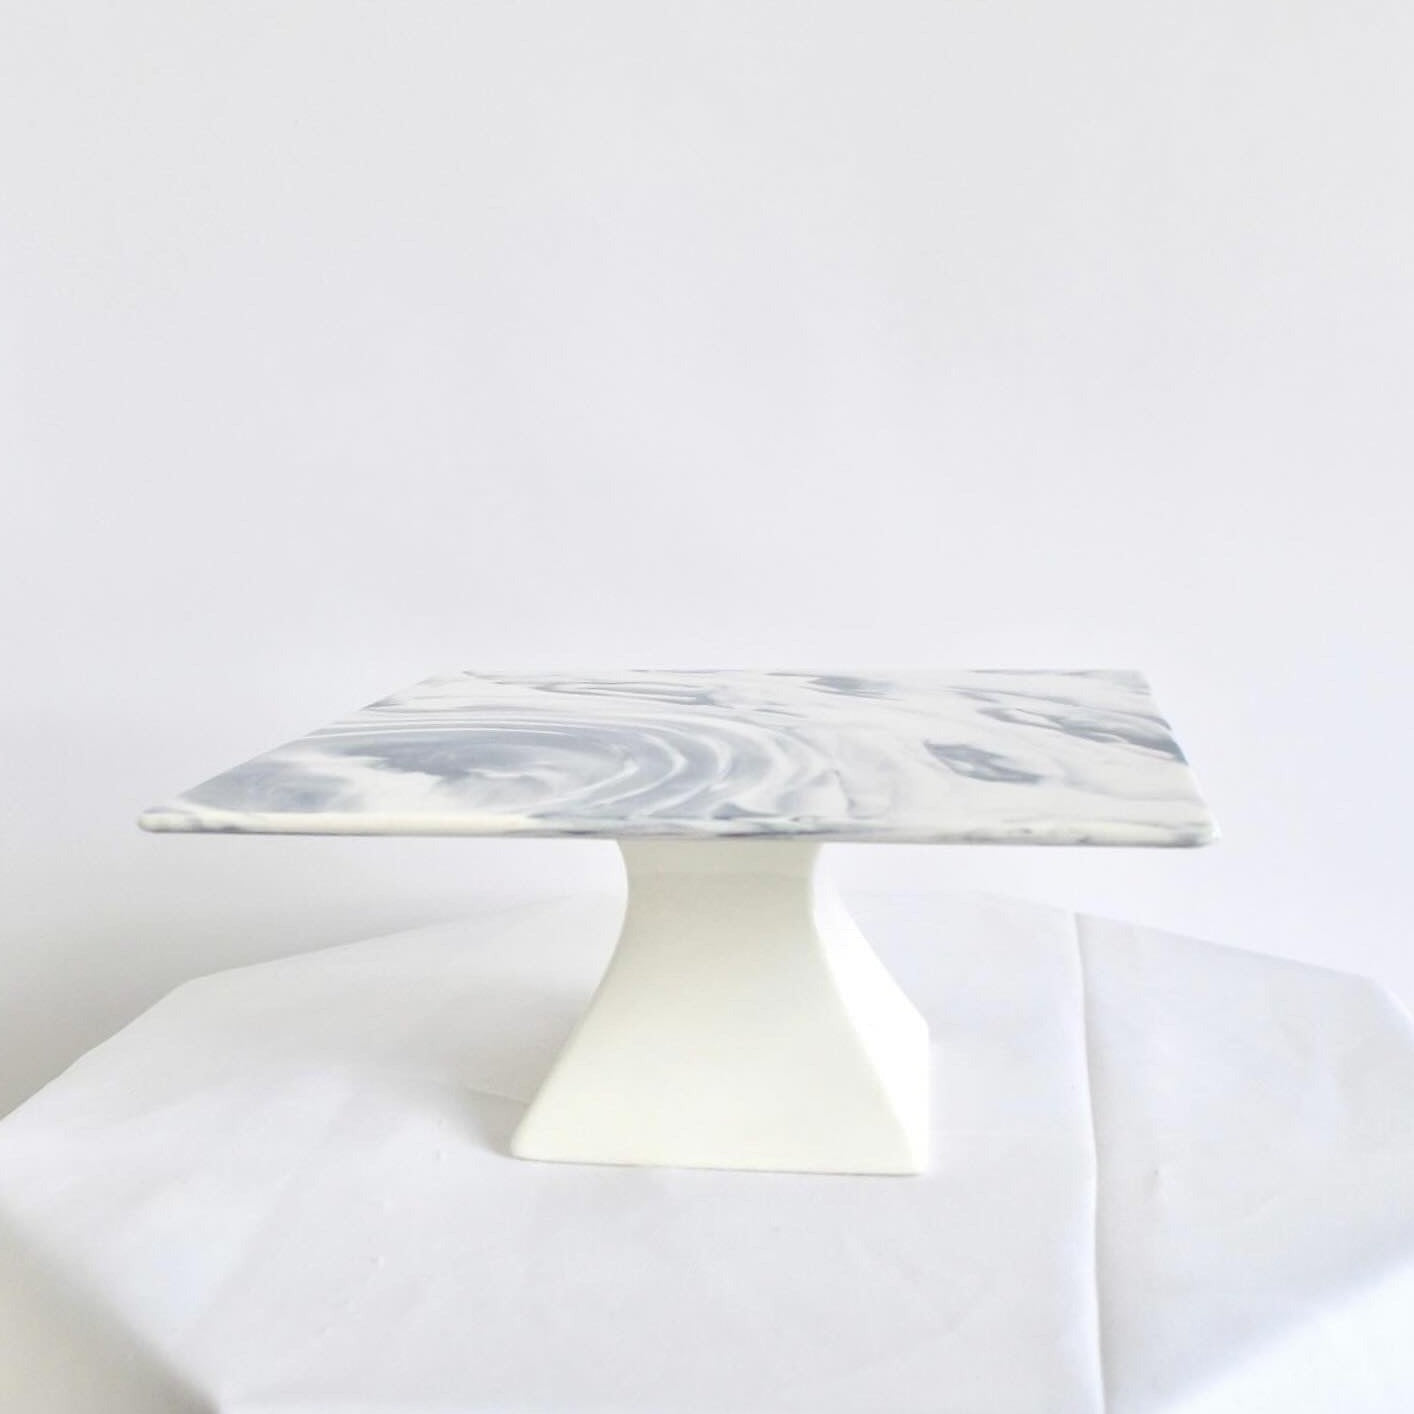 Blue + white marbled square cake stand